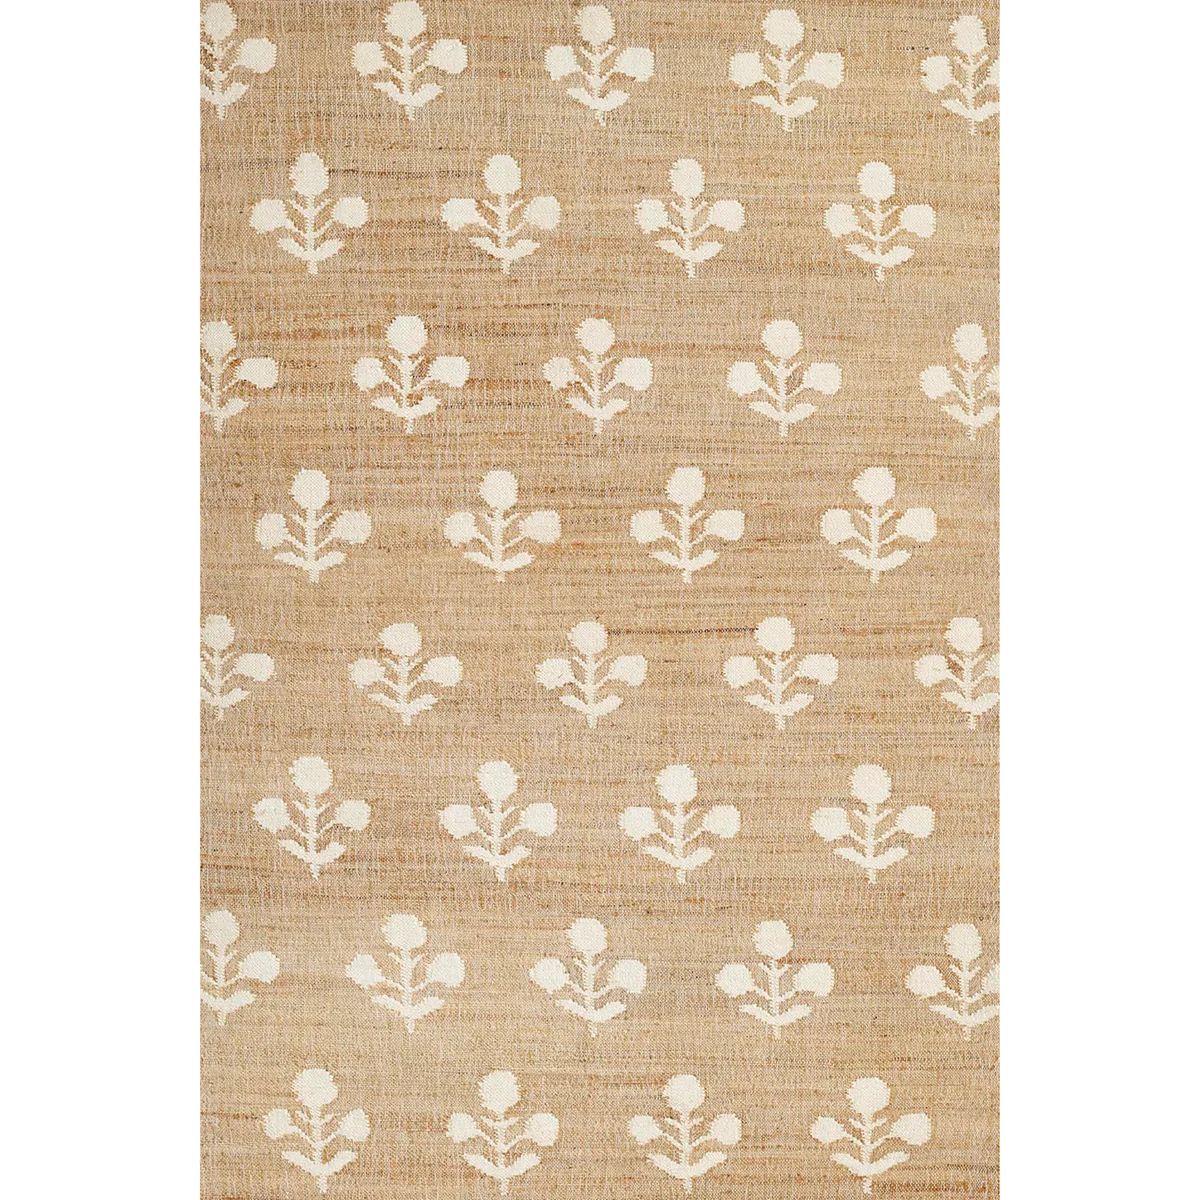 Erin Gates by Momeni Orchard Bloom Rug | Mintwood Home